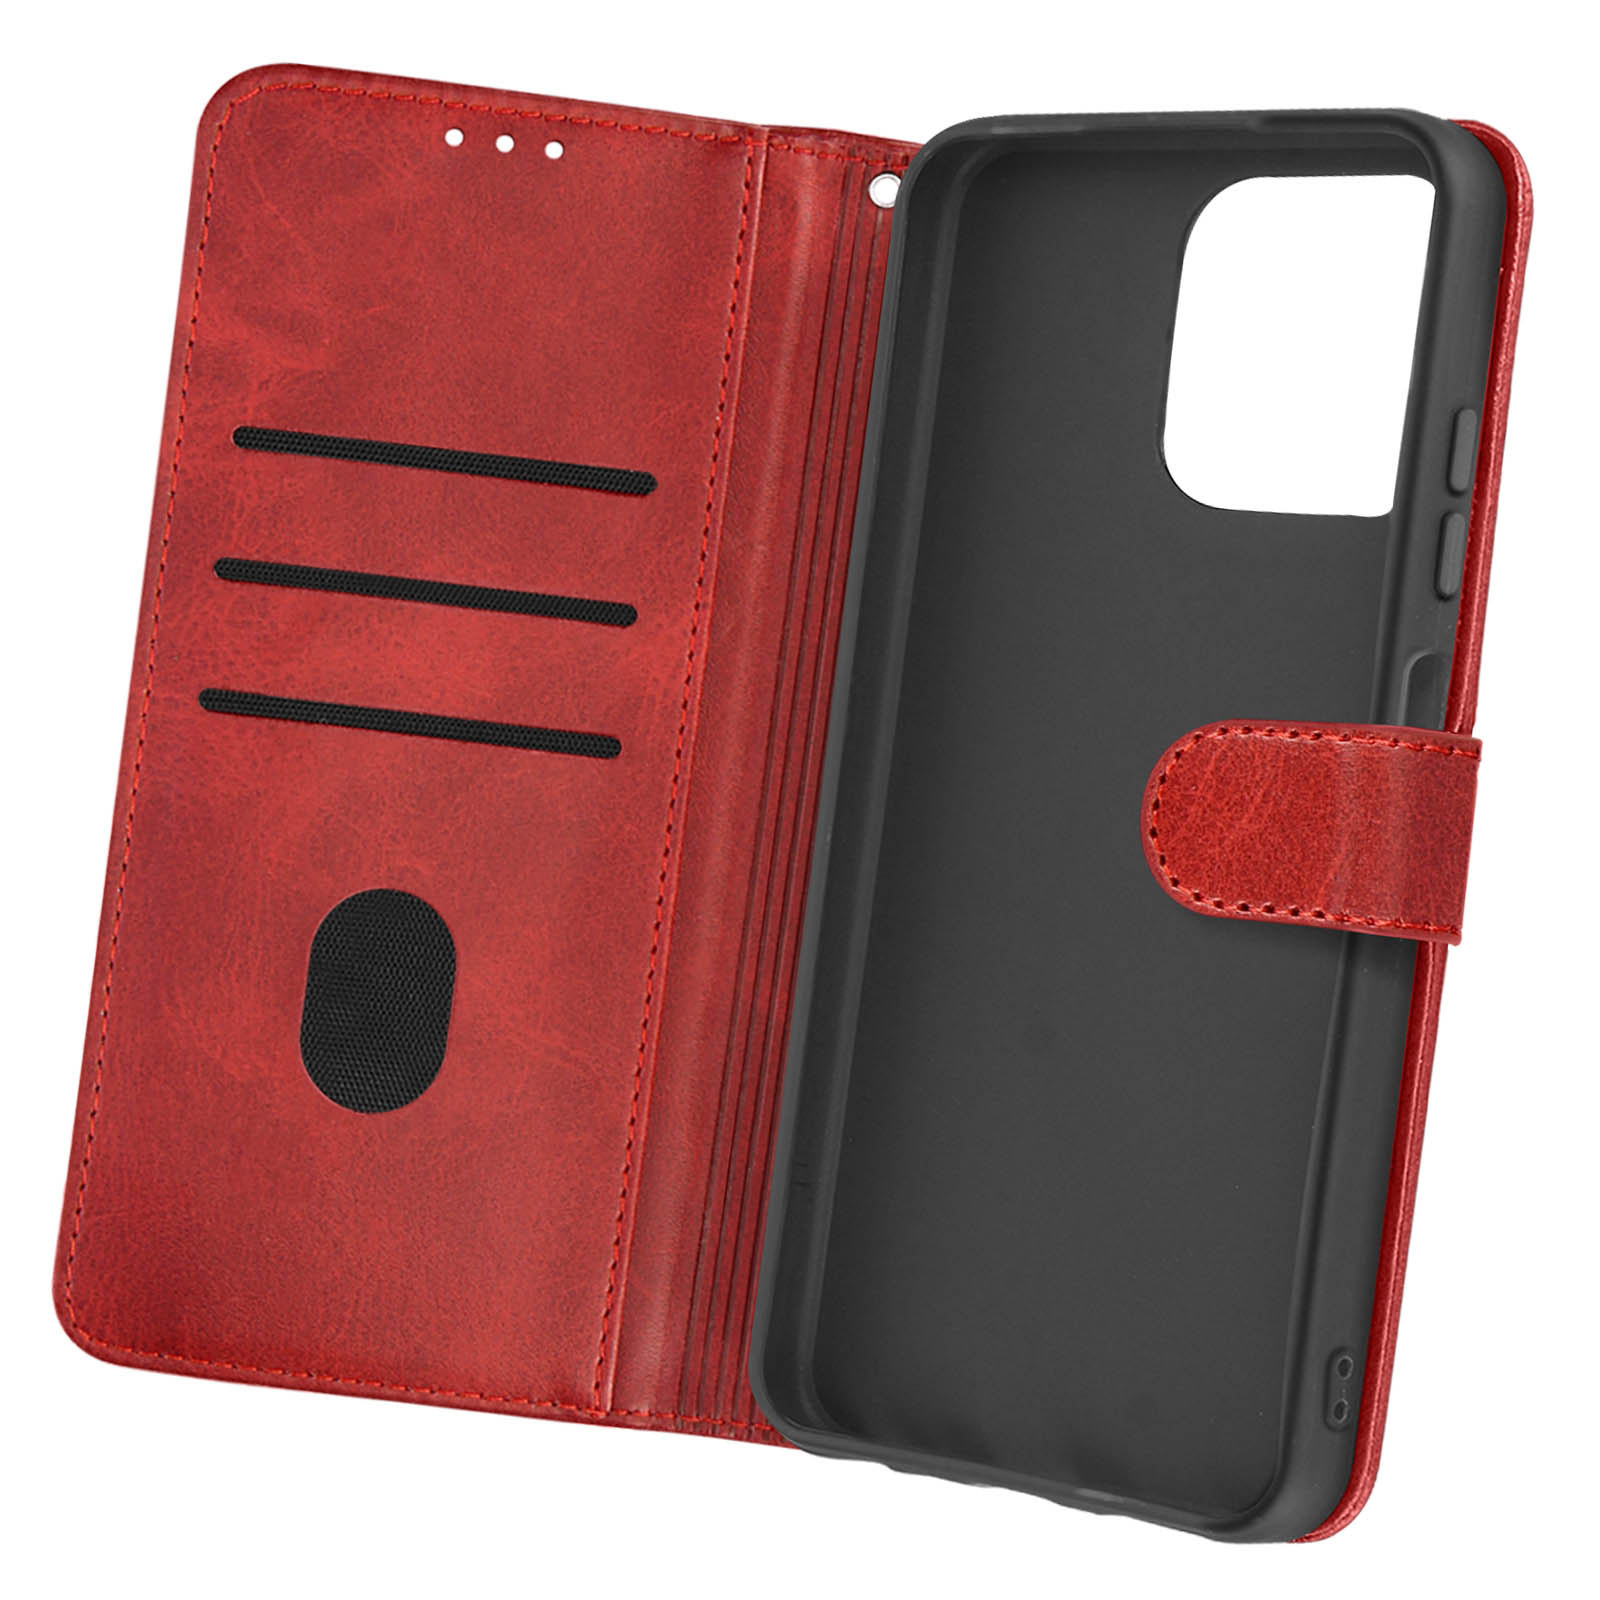 AVIZAR Bookstyle Series, Note Bookcover, 16 Pro, Ulefone, Rot